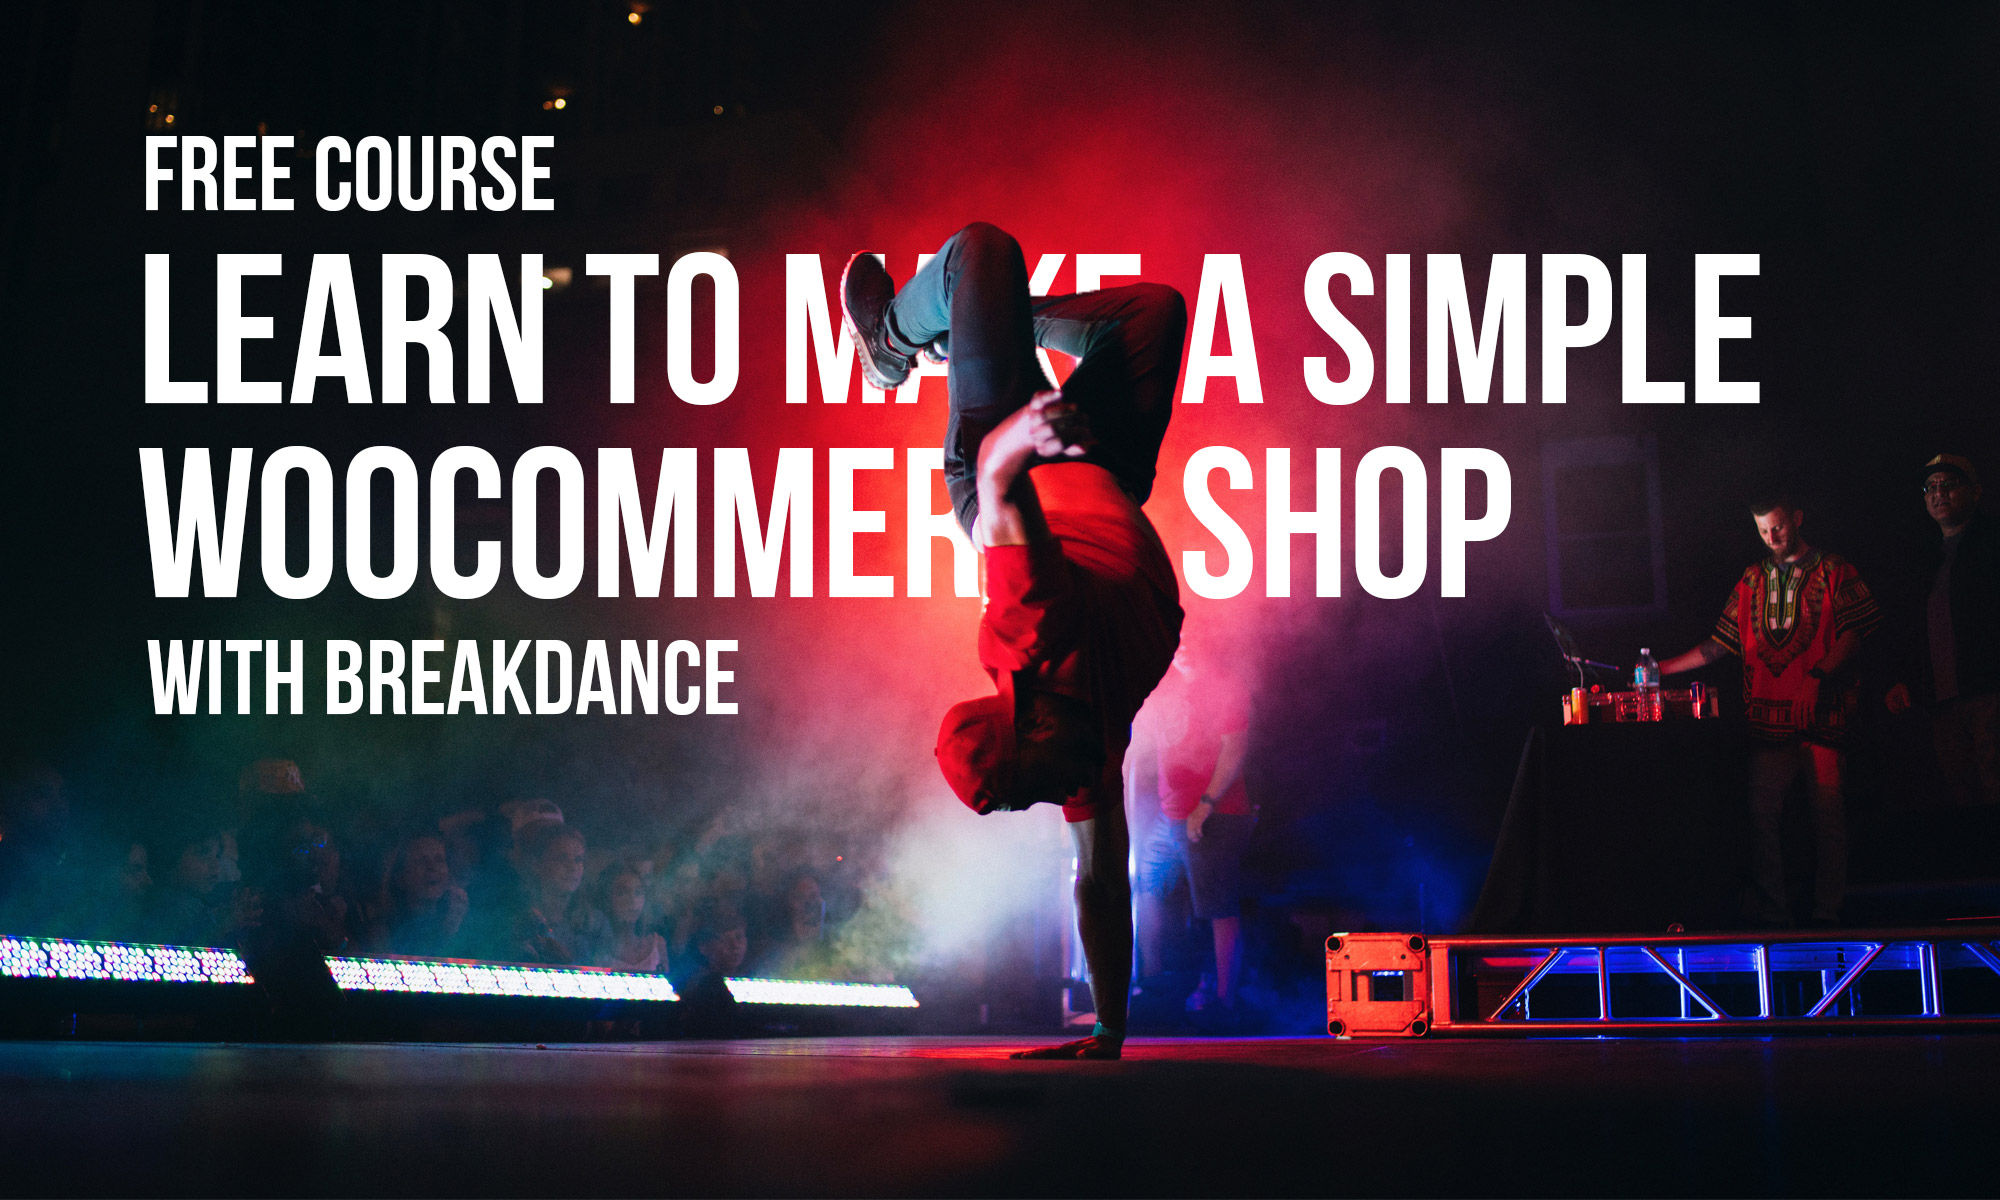 Let’s make a Woocommerce shop with Breakdance